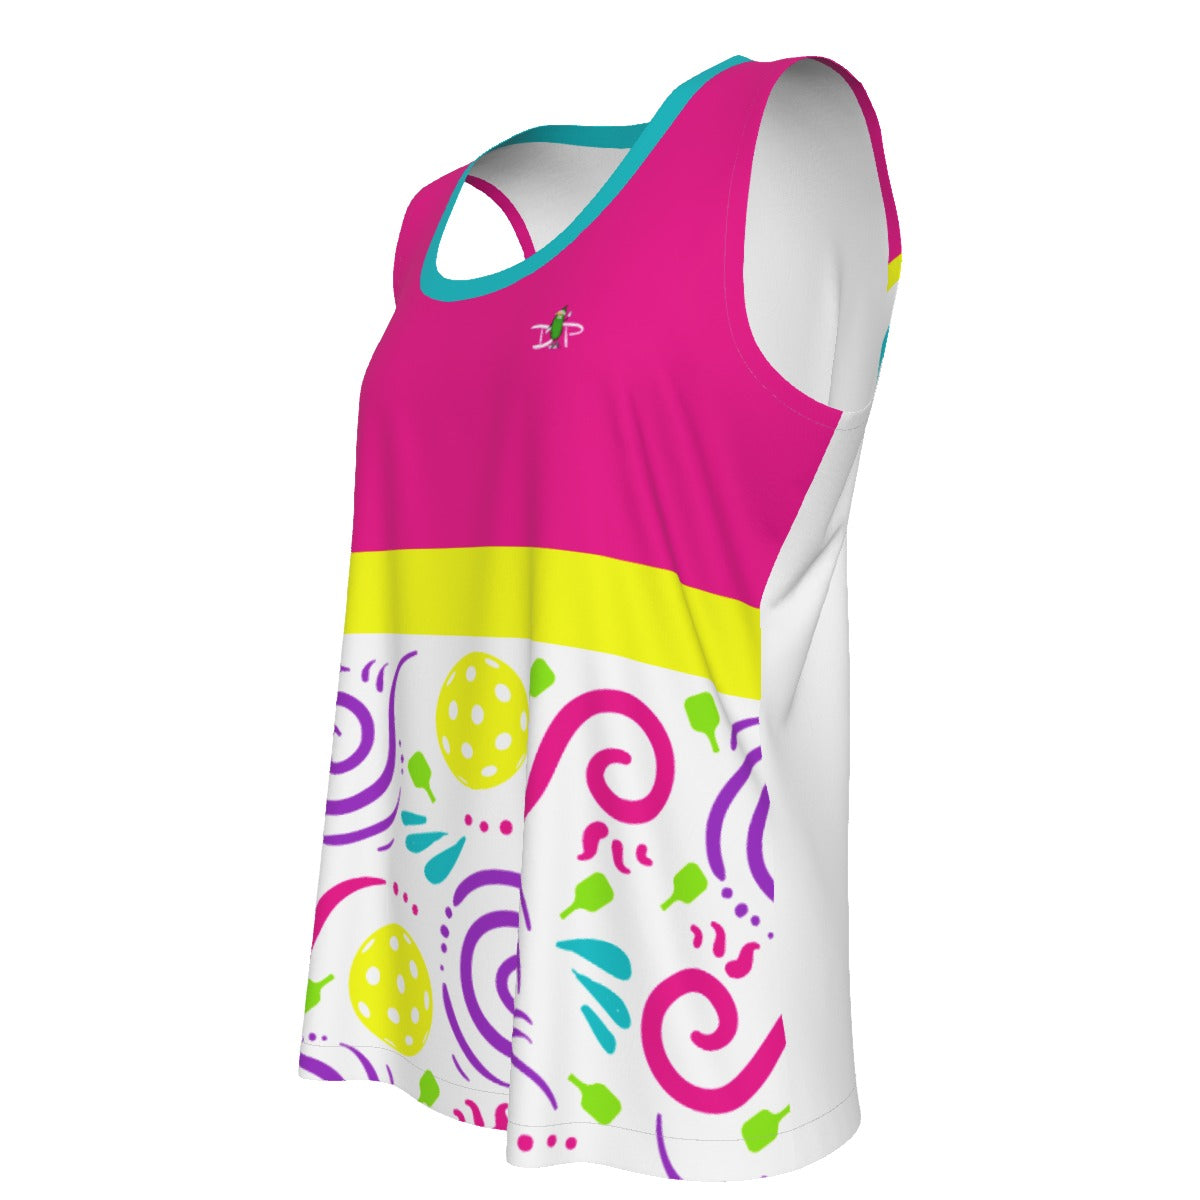 It's Swell - White - Hot Pink - Sports Tank Top by Dizzy Pickle